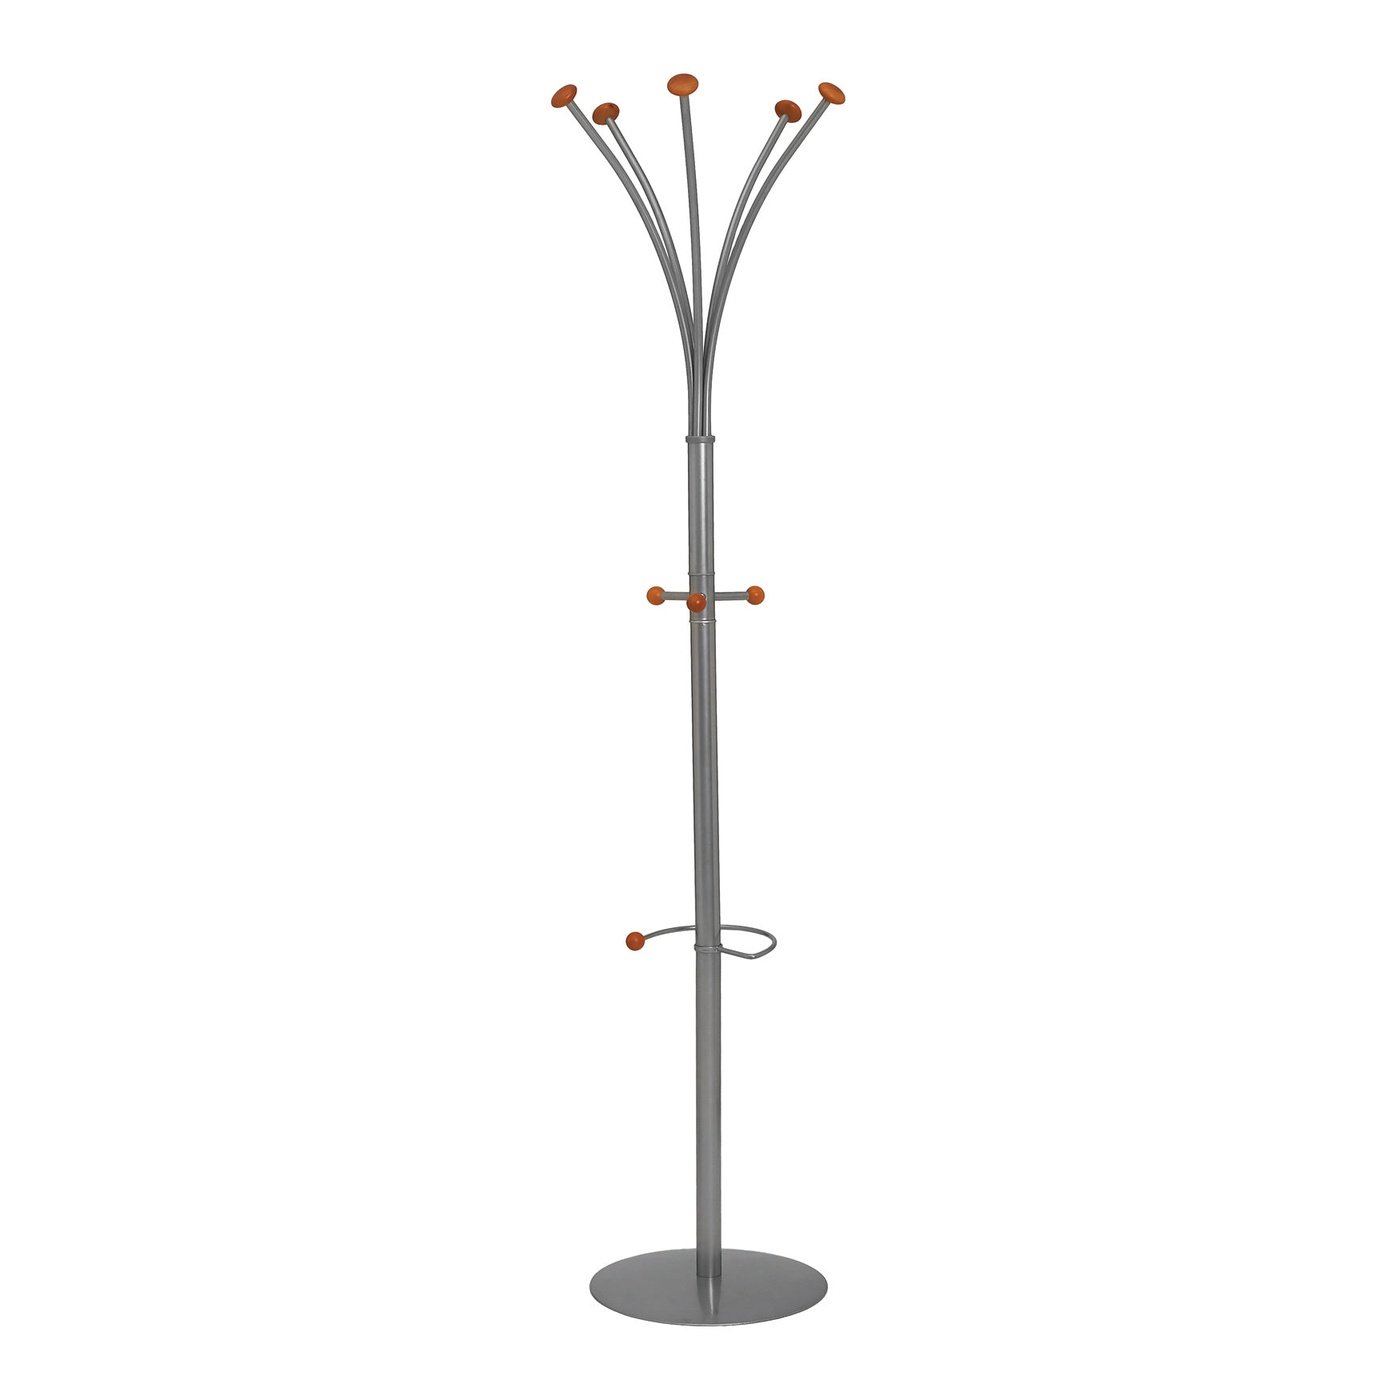 Dynamic Classic Silver Steel Office Coat Stand - 1870mm Height, 380mm Width, Self-Assembly, 1-Year Guarantee